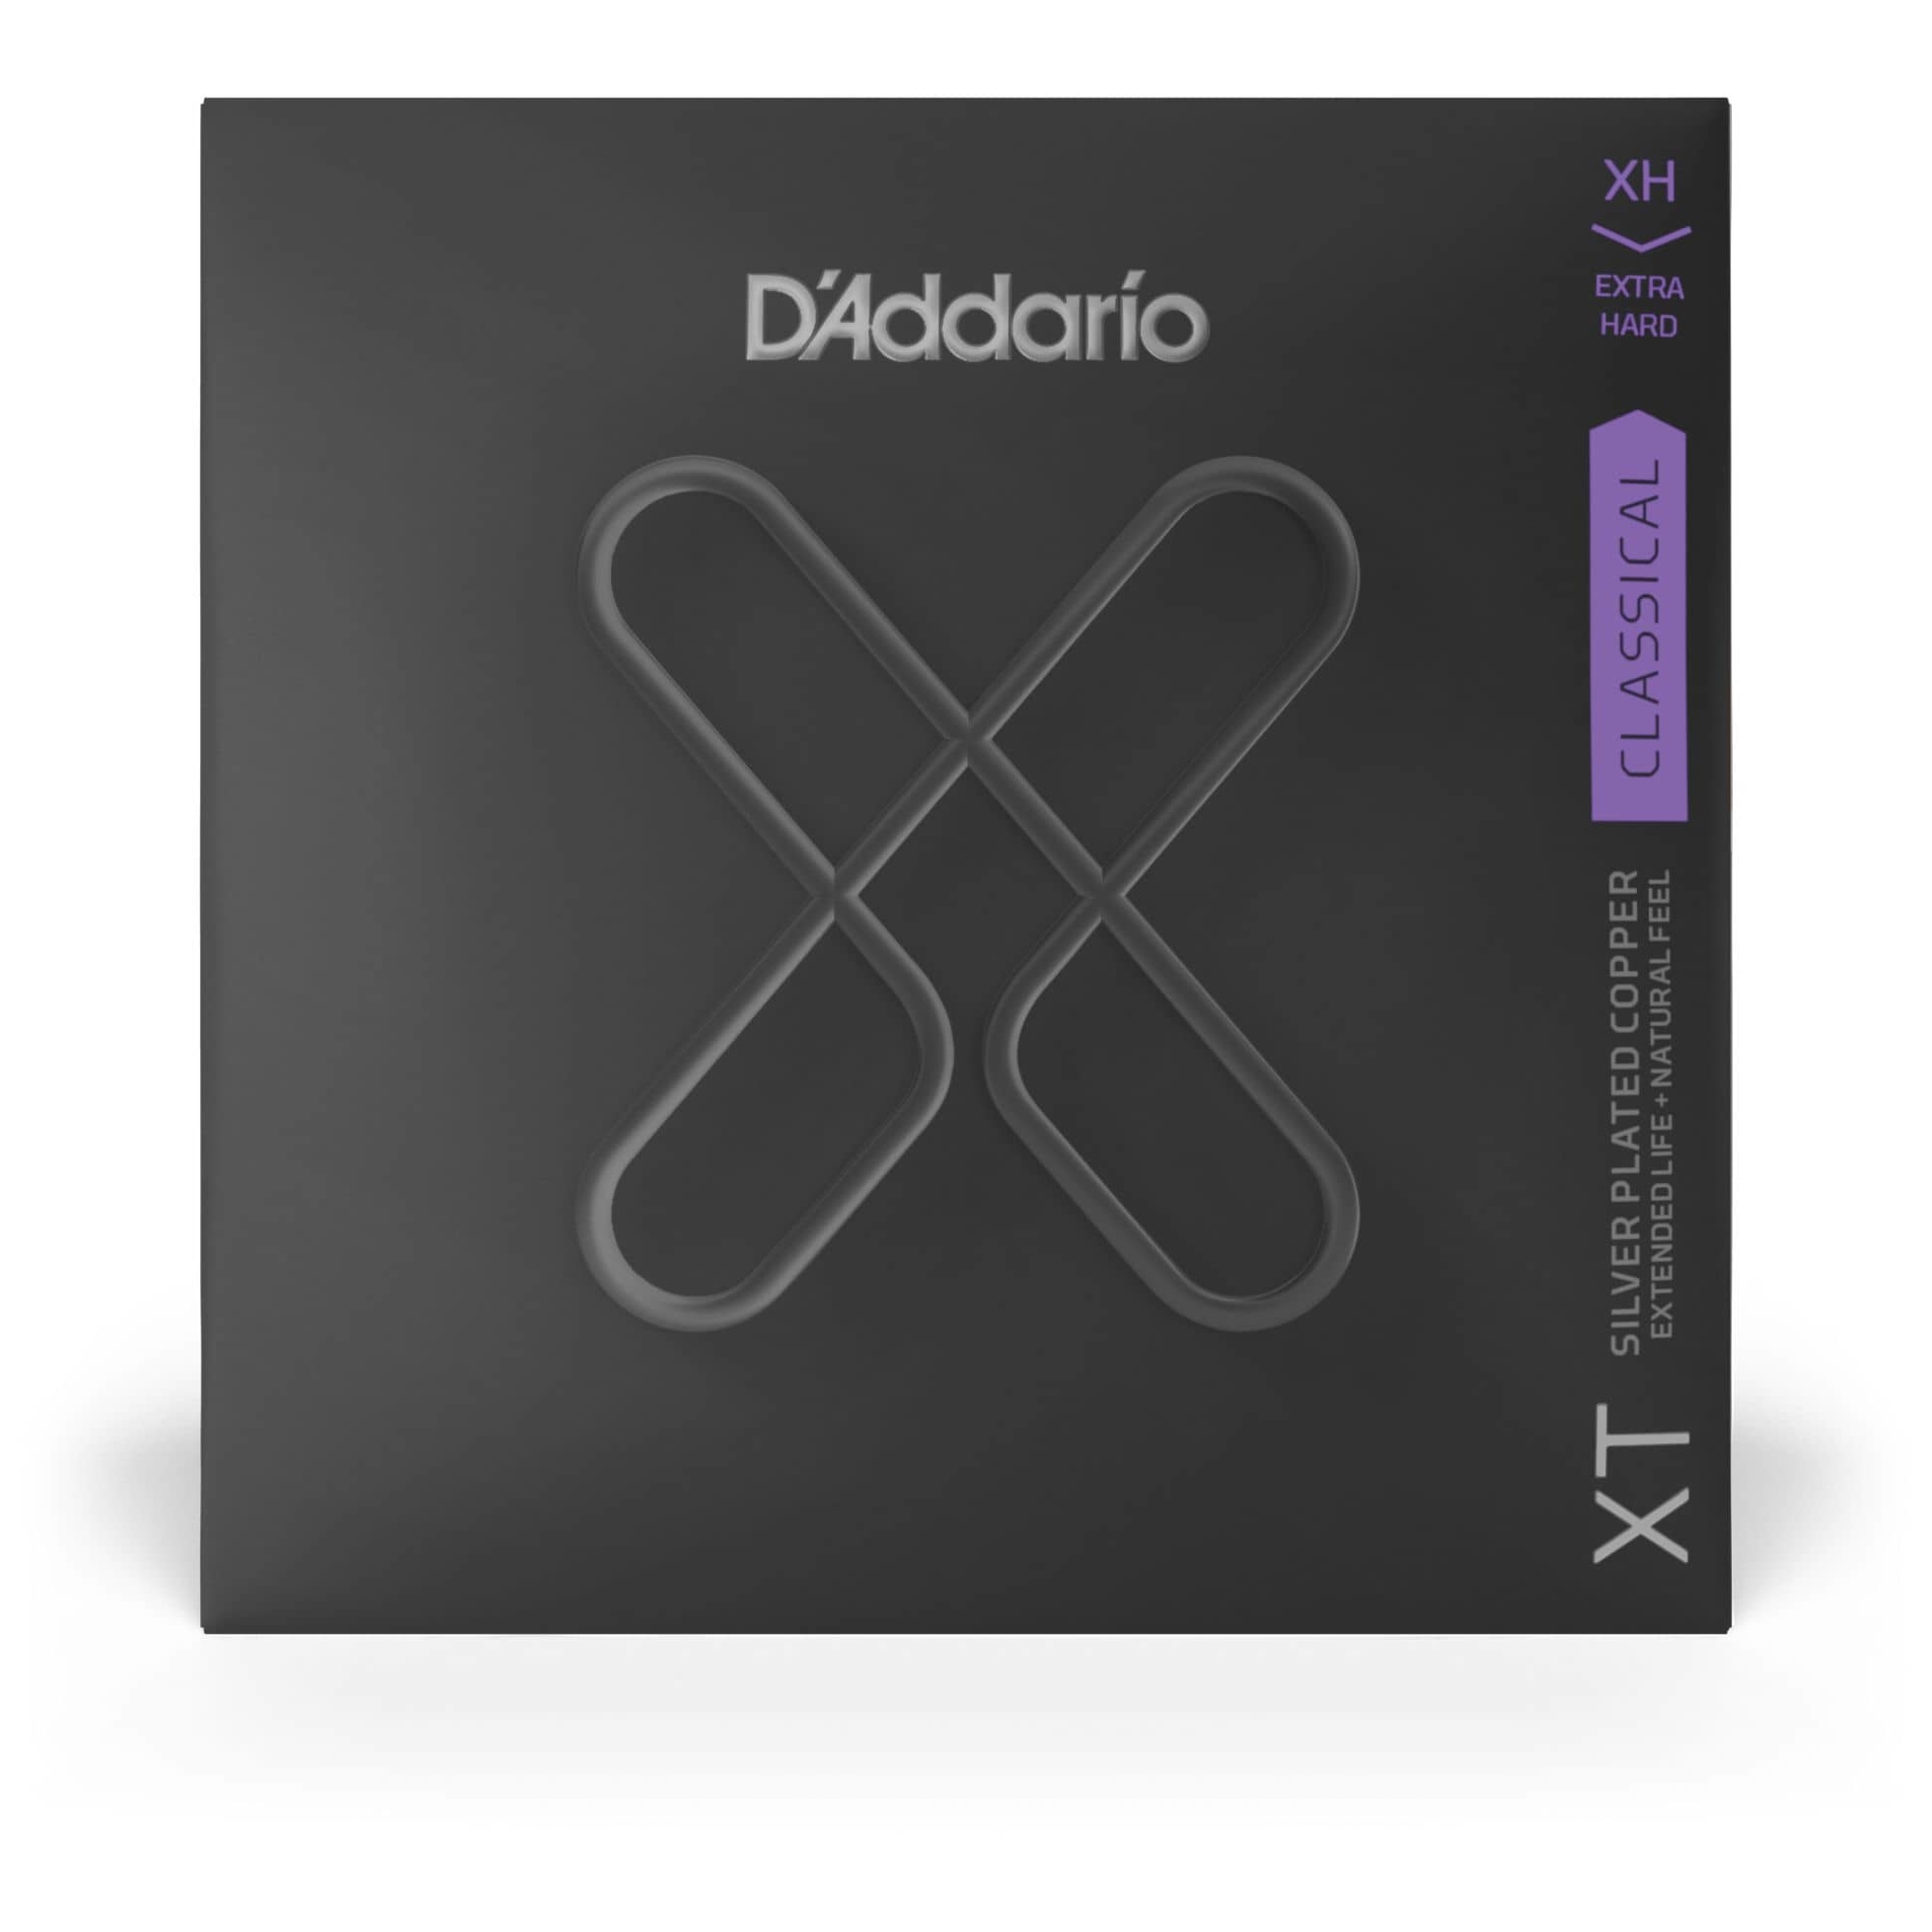 D’Addario XTC44 - XT Classical Silver Plated Copper, Extra Hard Tension